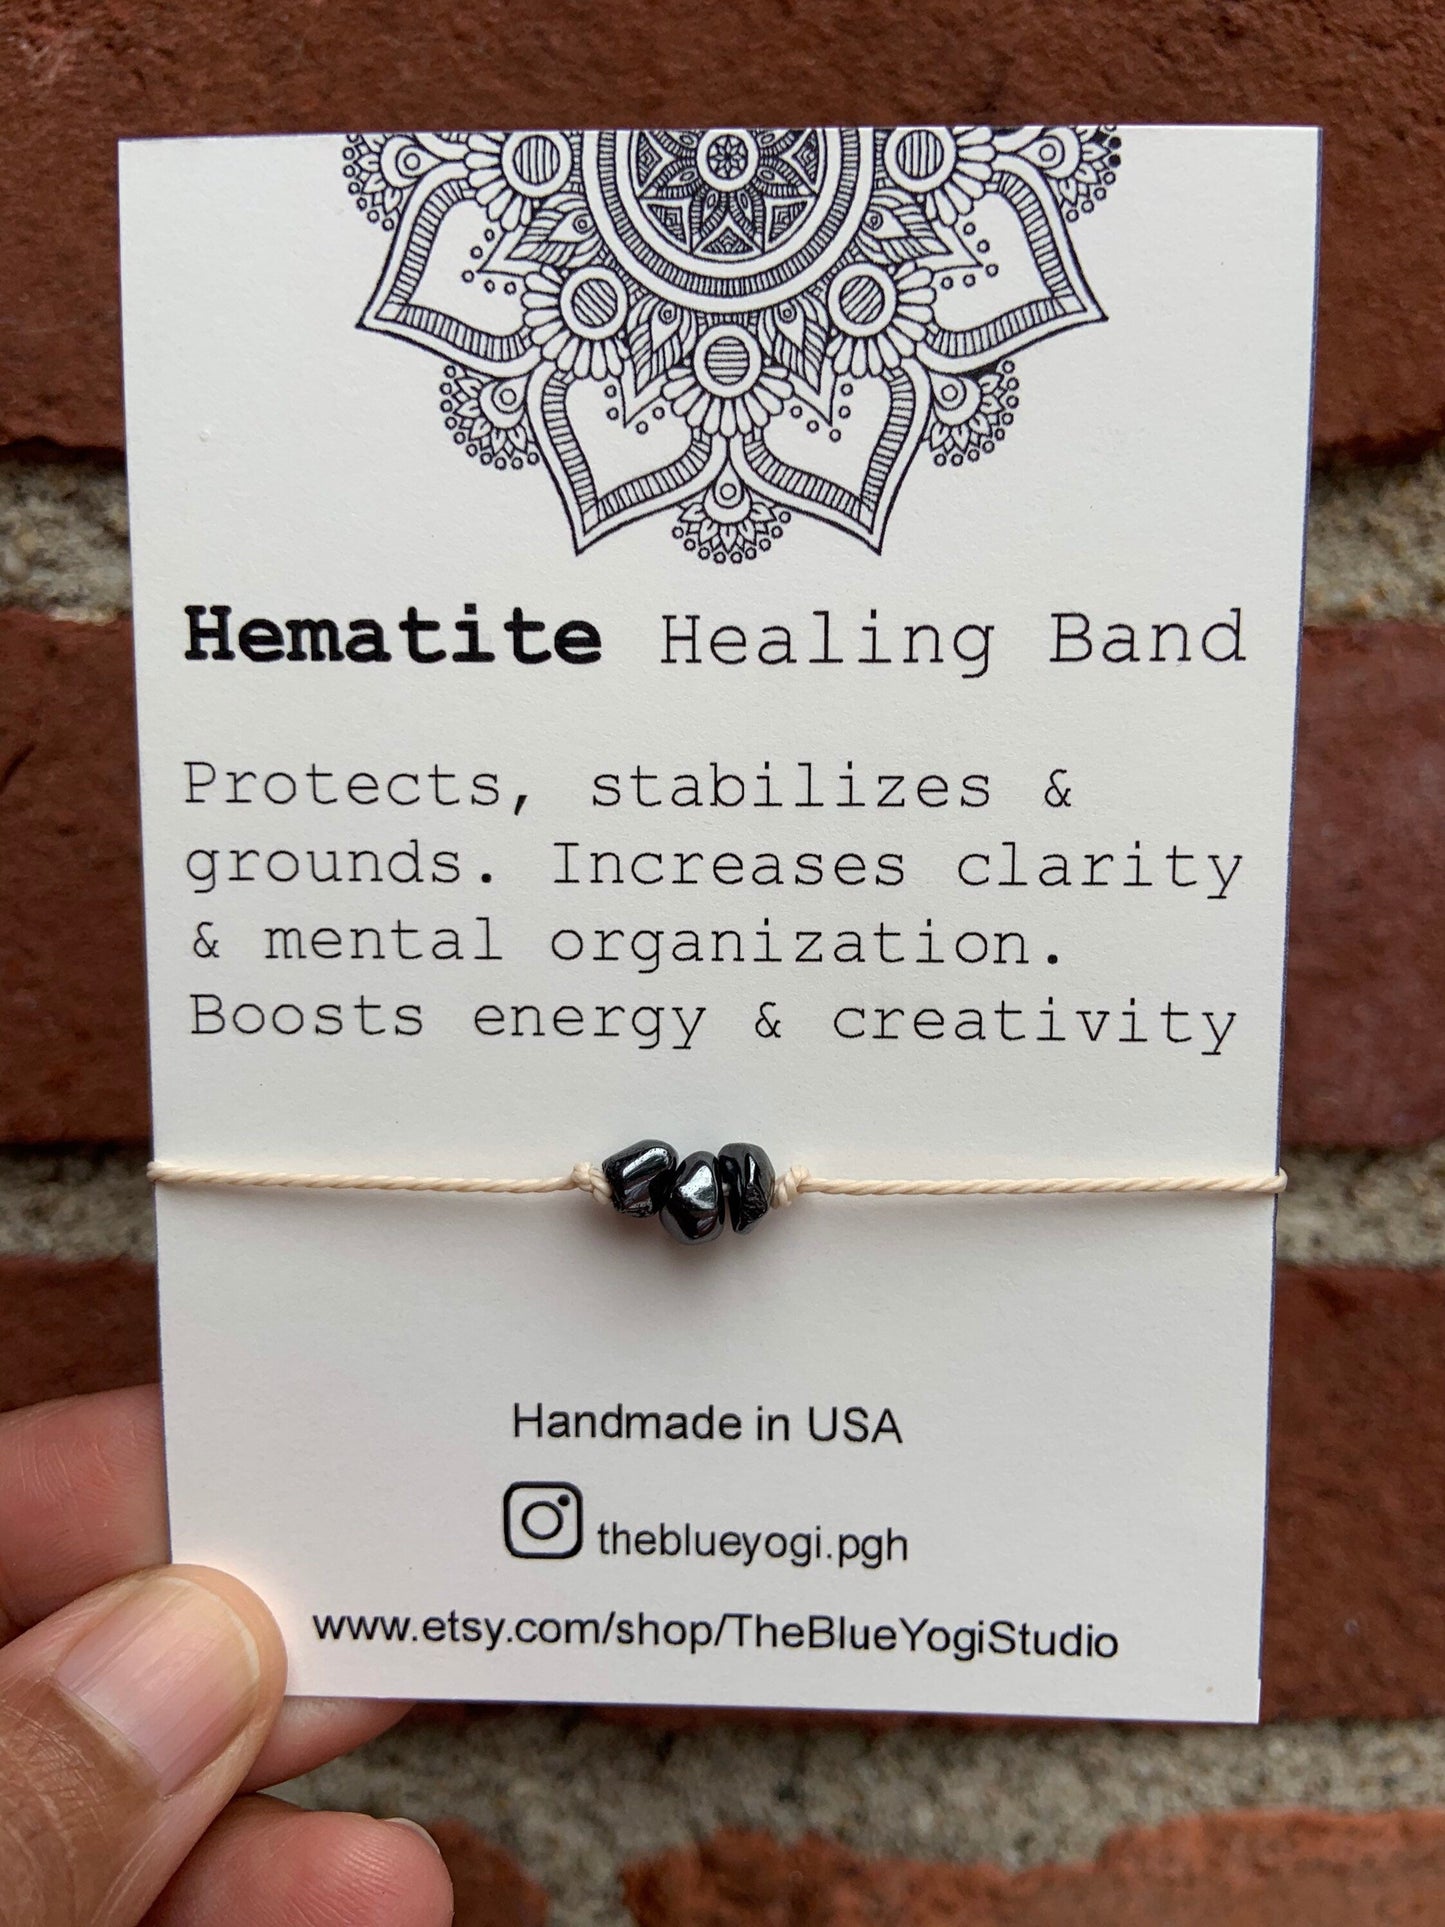 Hematite Healing Band with an affirmation